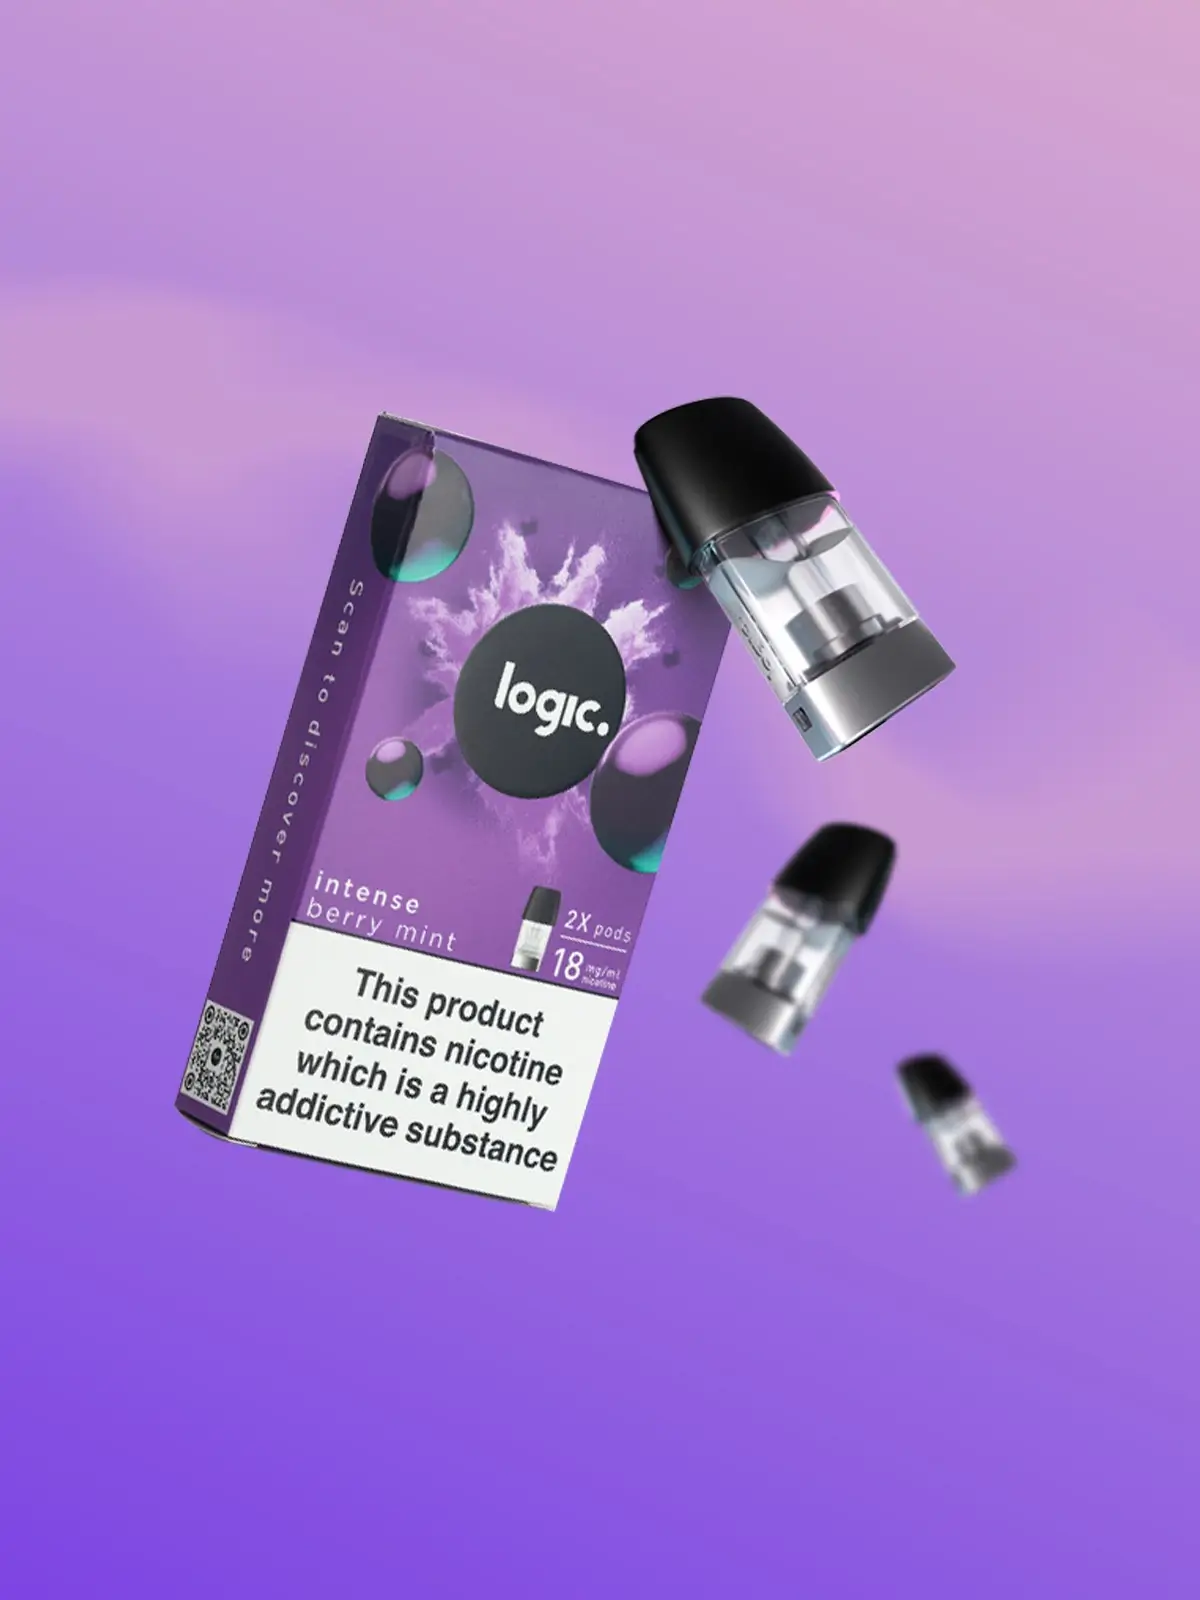 A pack of Logic Intense Berry Mint pods floating in front of a purple background